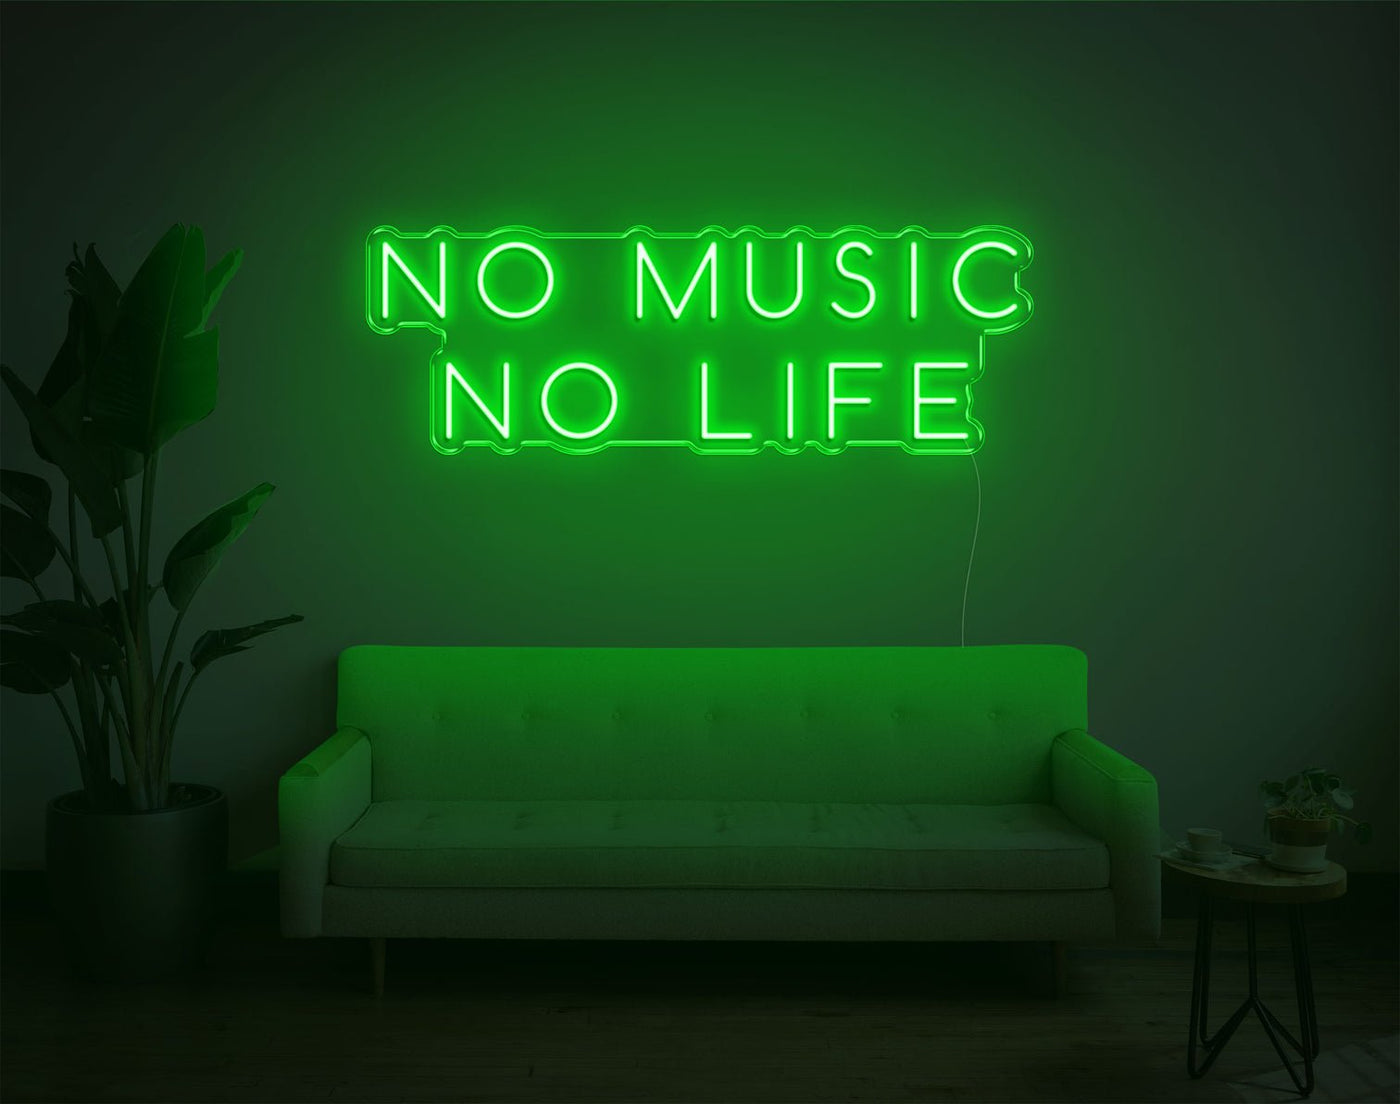 No Music No Life LED Neon Sign - 12inch x 34inchHot Pink